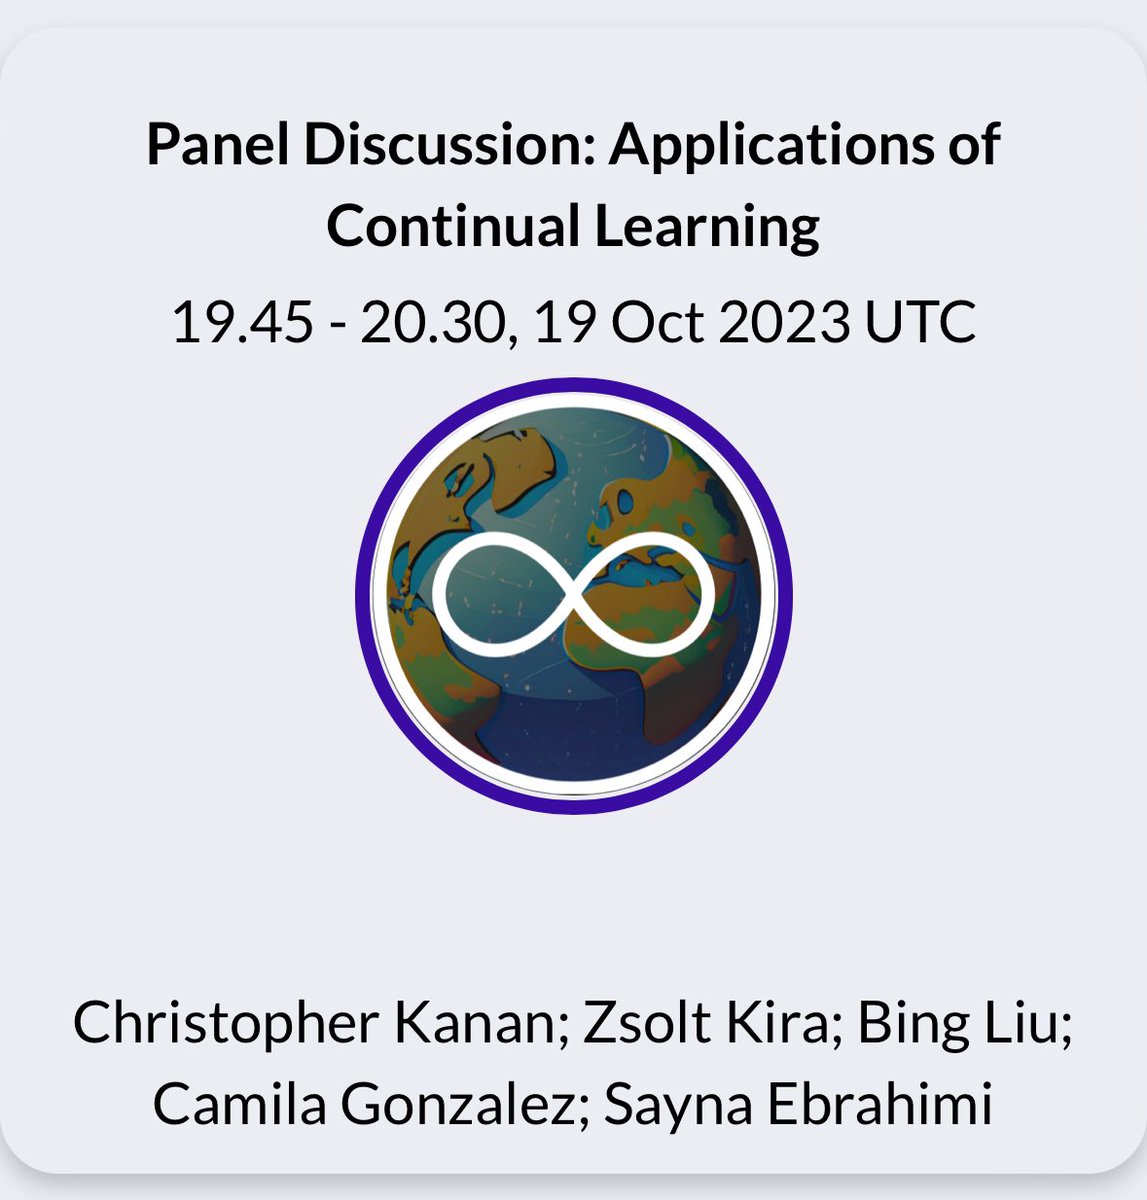 🔥What makes CLAI Unconf an UNconference? Community interaction! 

Come join our panel discussion with world-renowned continual learning experts @chriskanan @zsoltkira Bing Liu, @camgbus & @SaynaEbrahimi 19:45-20:30 UTC on Oct 19th!

🚨Register for free: unconf.continualai.org/register